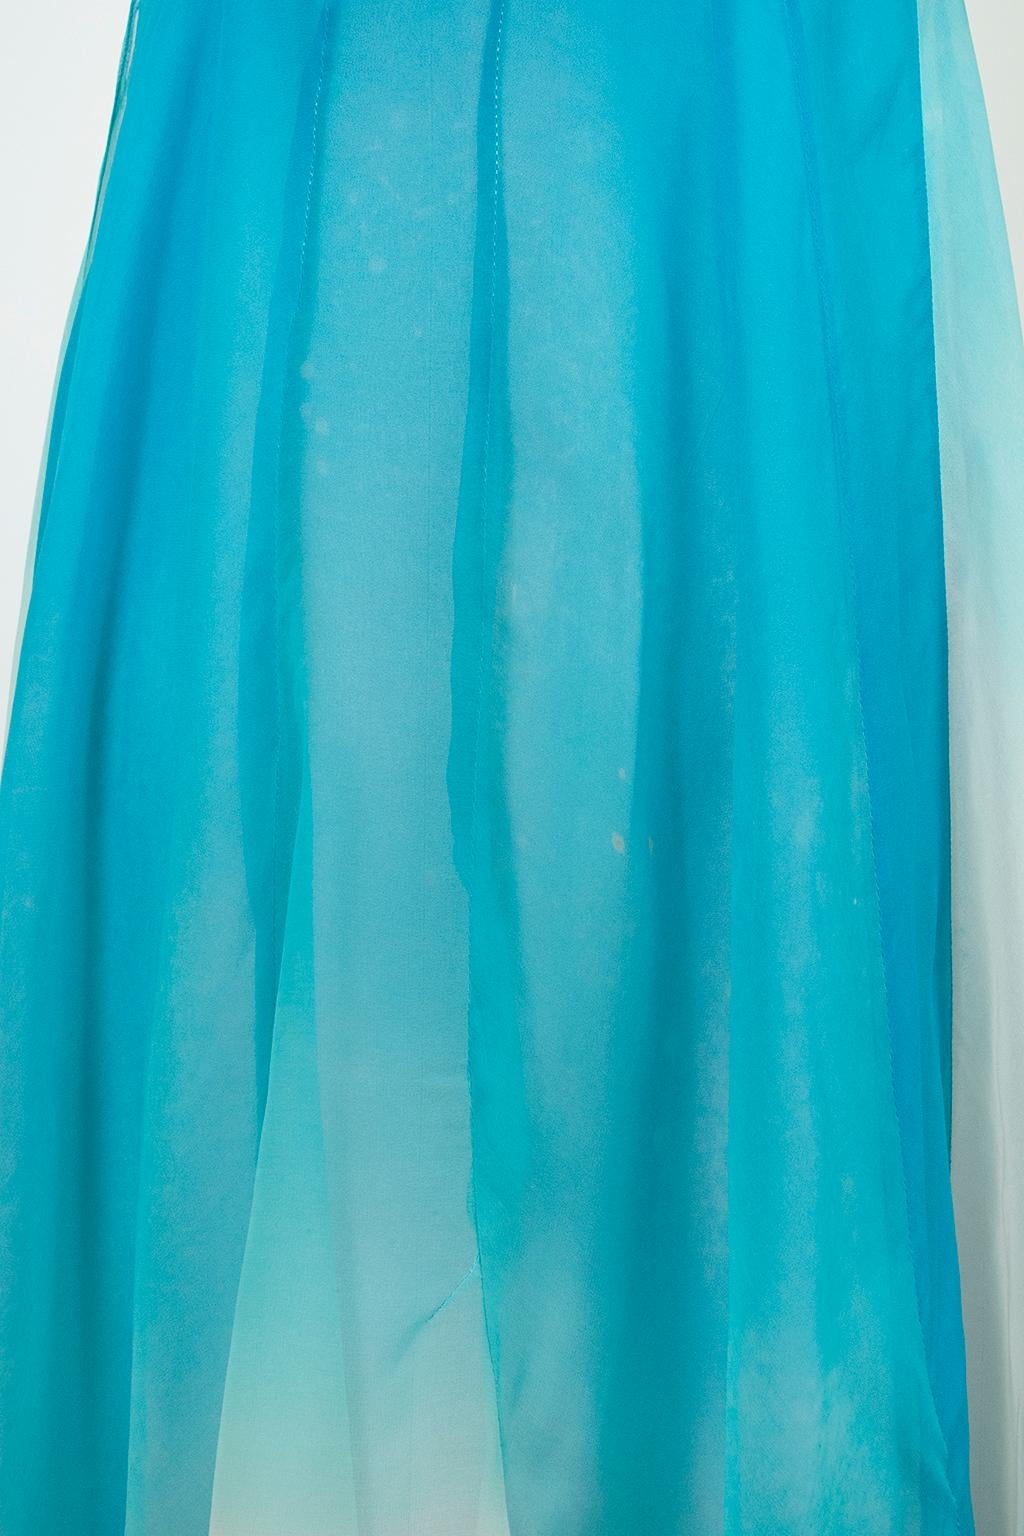 Aqua Ombré Tie Dye Chiffon Ball Gown with Ostrich Feather Trim – XS, 1960s For Sale 9